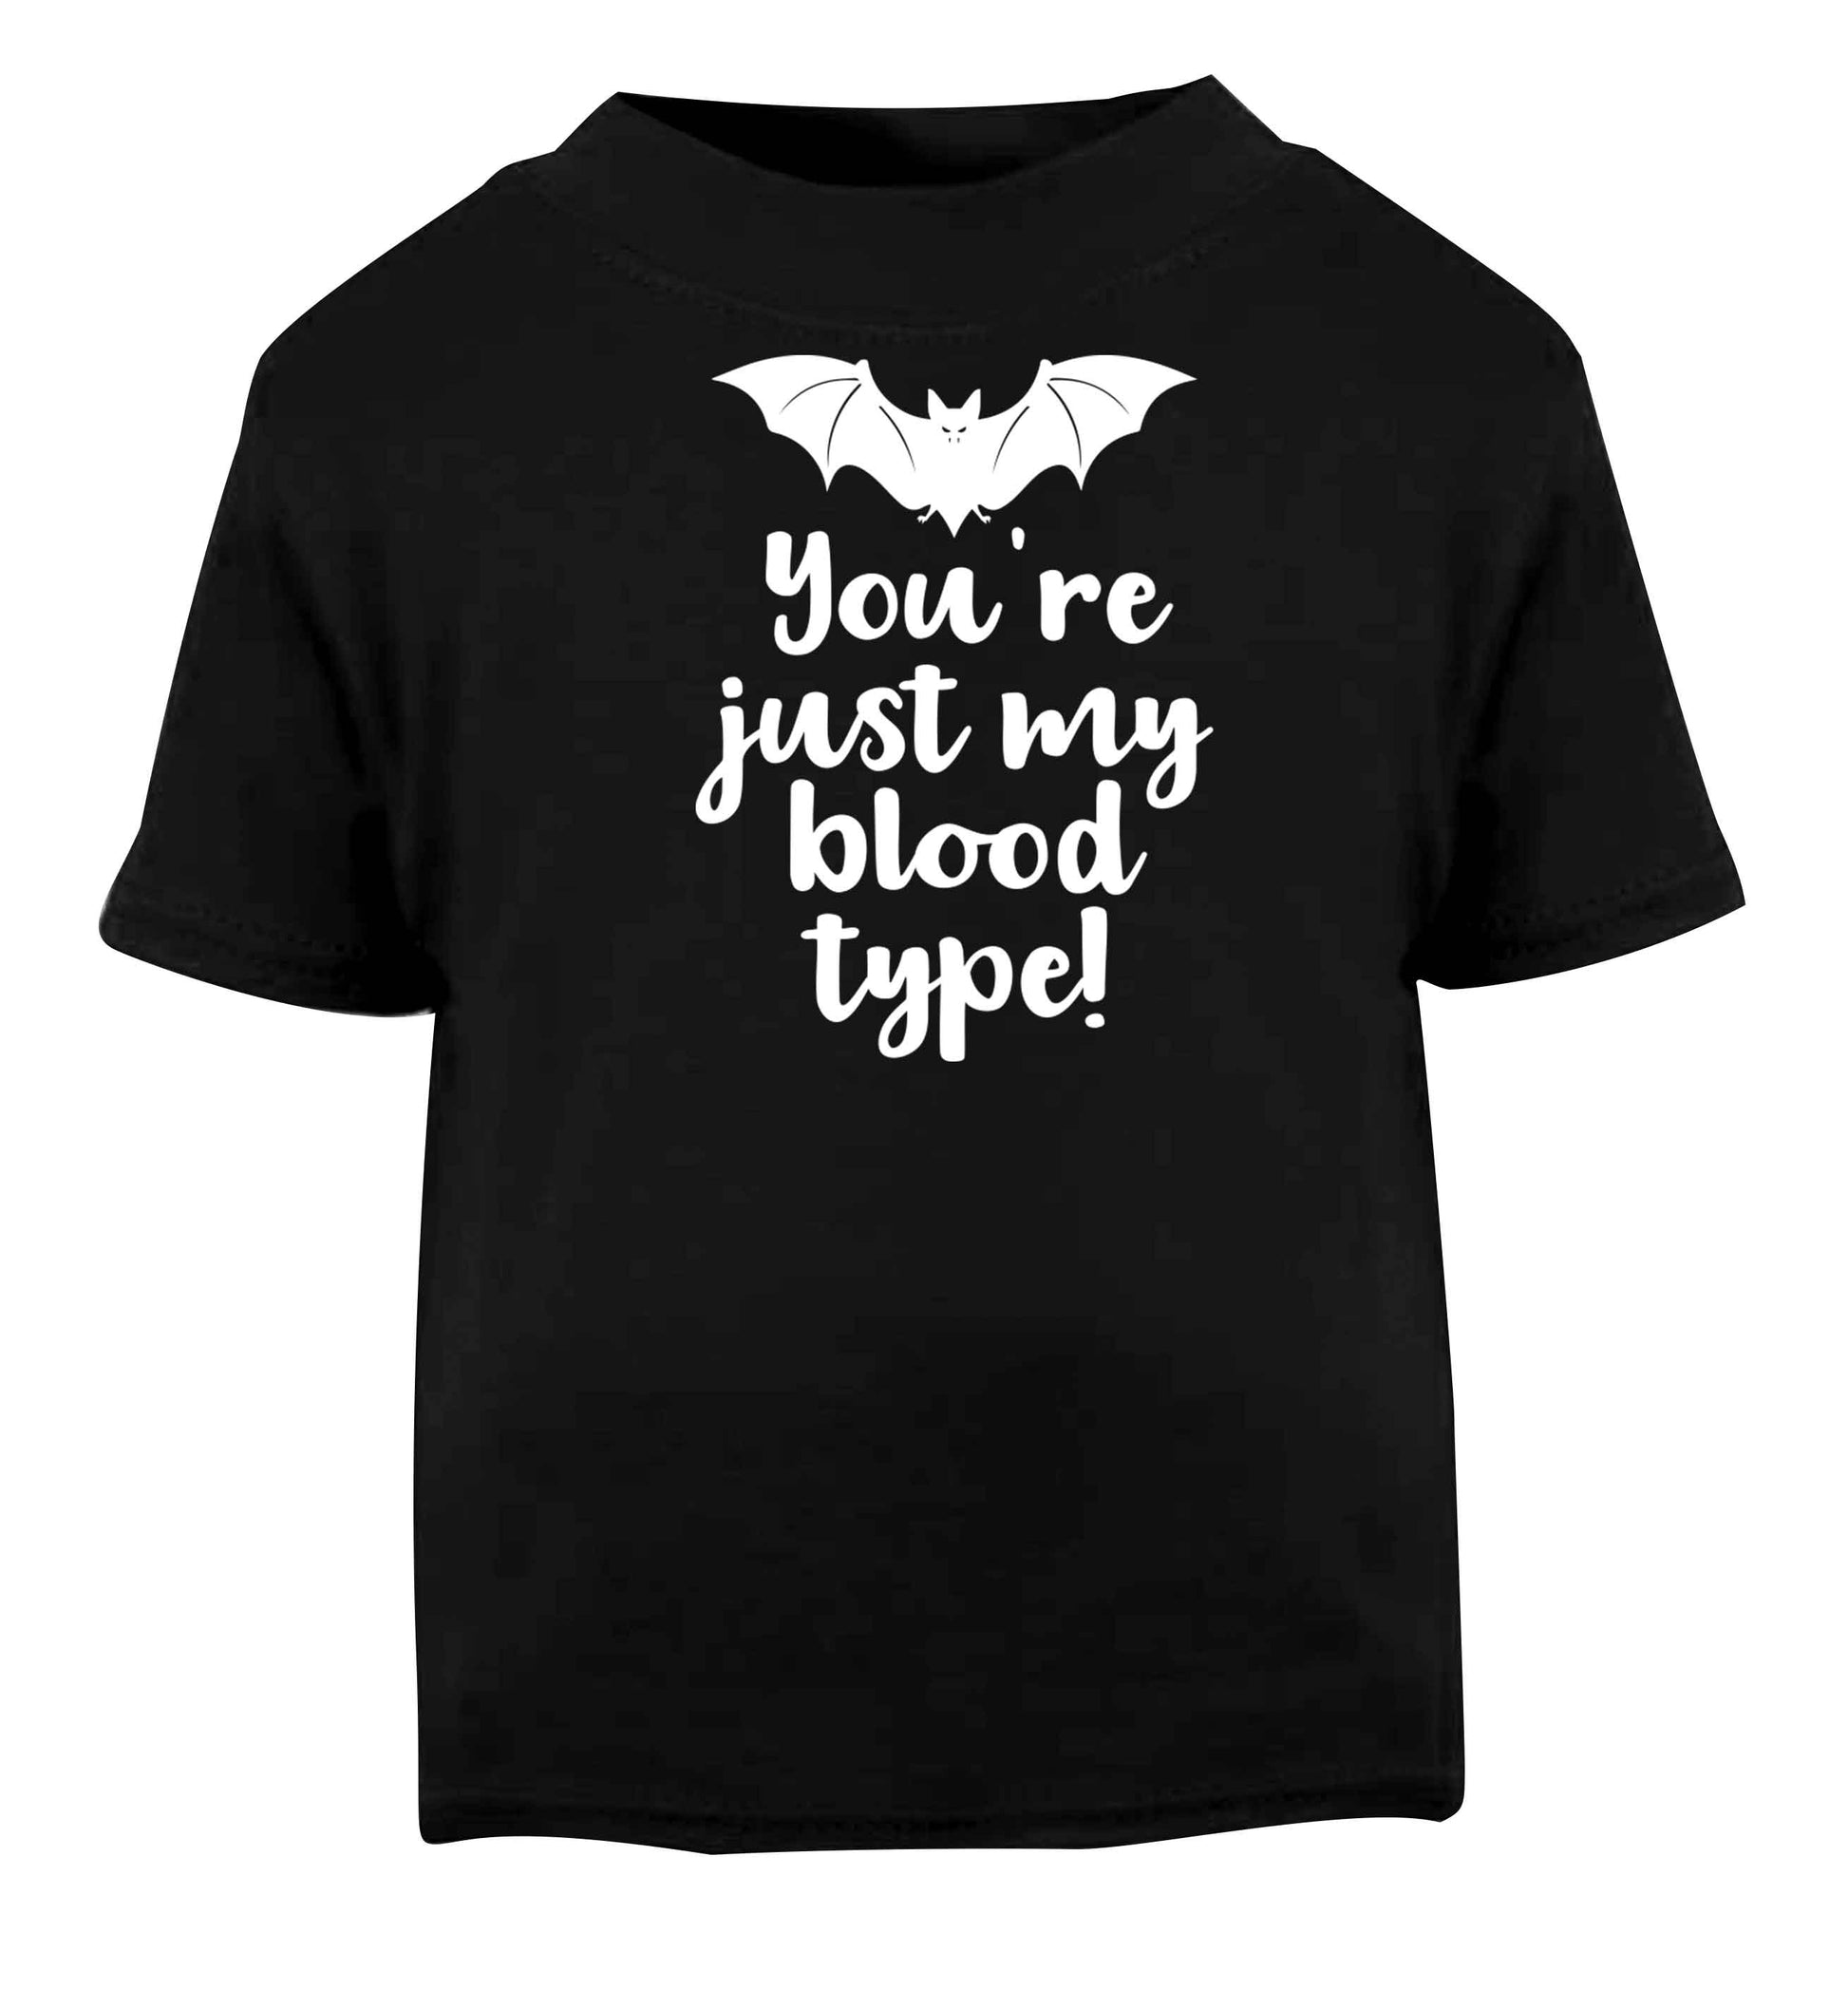 You're just my blood type Black baby toddler Tshirt 2 years